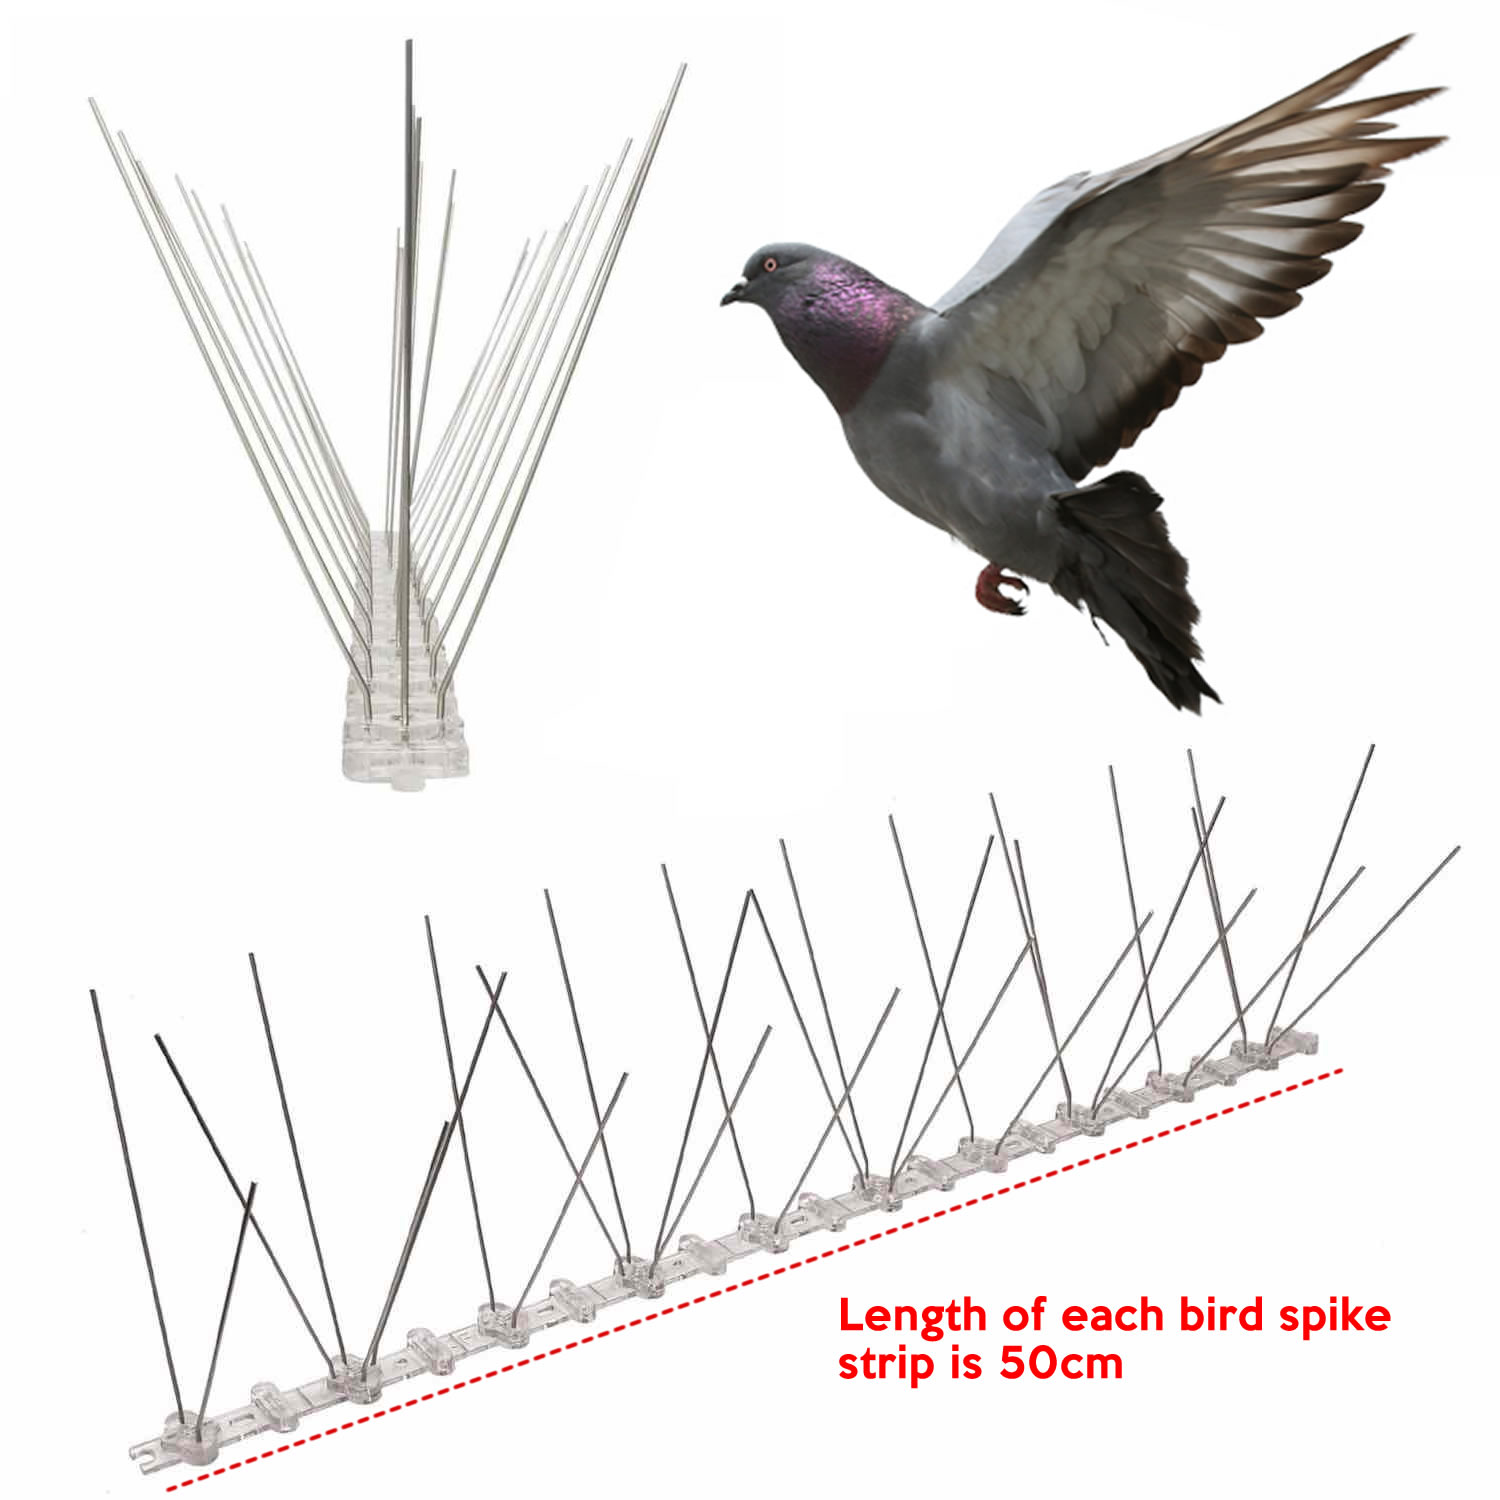 WELLUCK Bird Spikes for Small Birds Pigeons, 30 Feet (28 Strips) Fence Spike,  Nest Prevention Bird Off Spike Repellent, Anti Bird Spike Stainless Steel,  Smooth Polishing Harmless Deterrent : Amazon.ca: Patio, Lawn